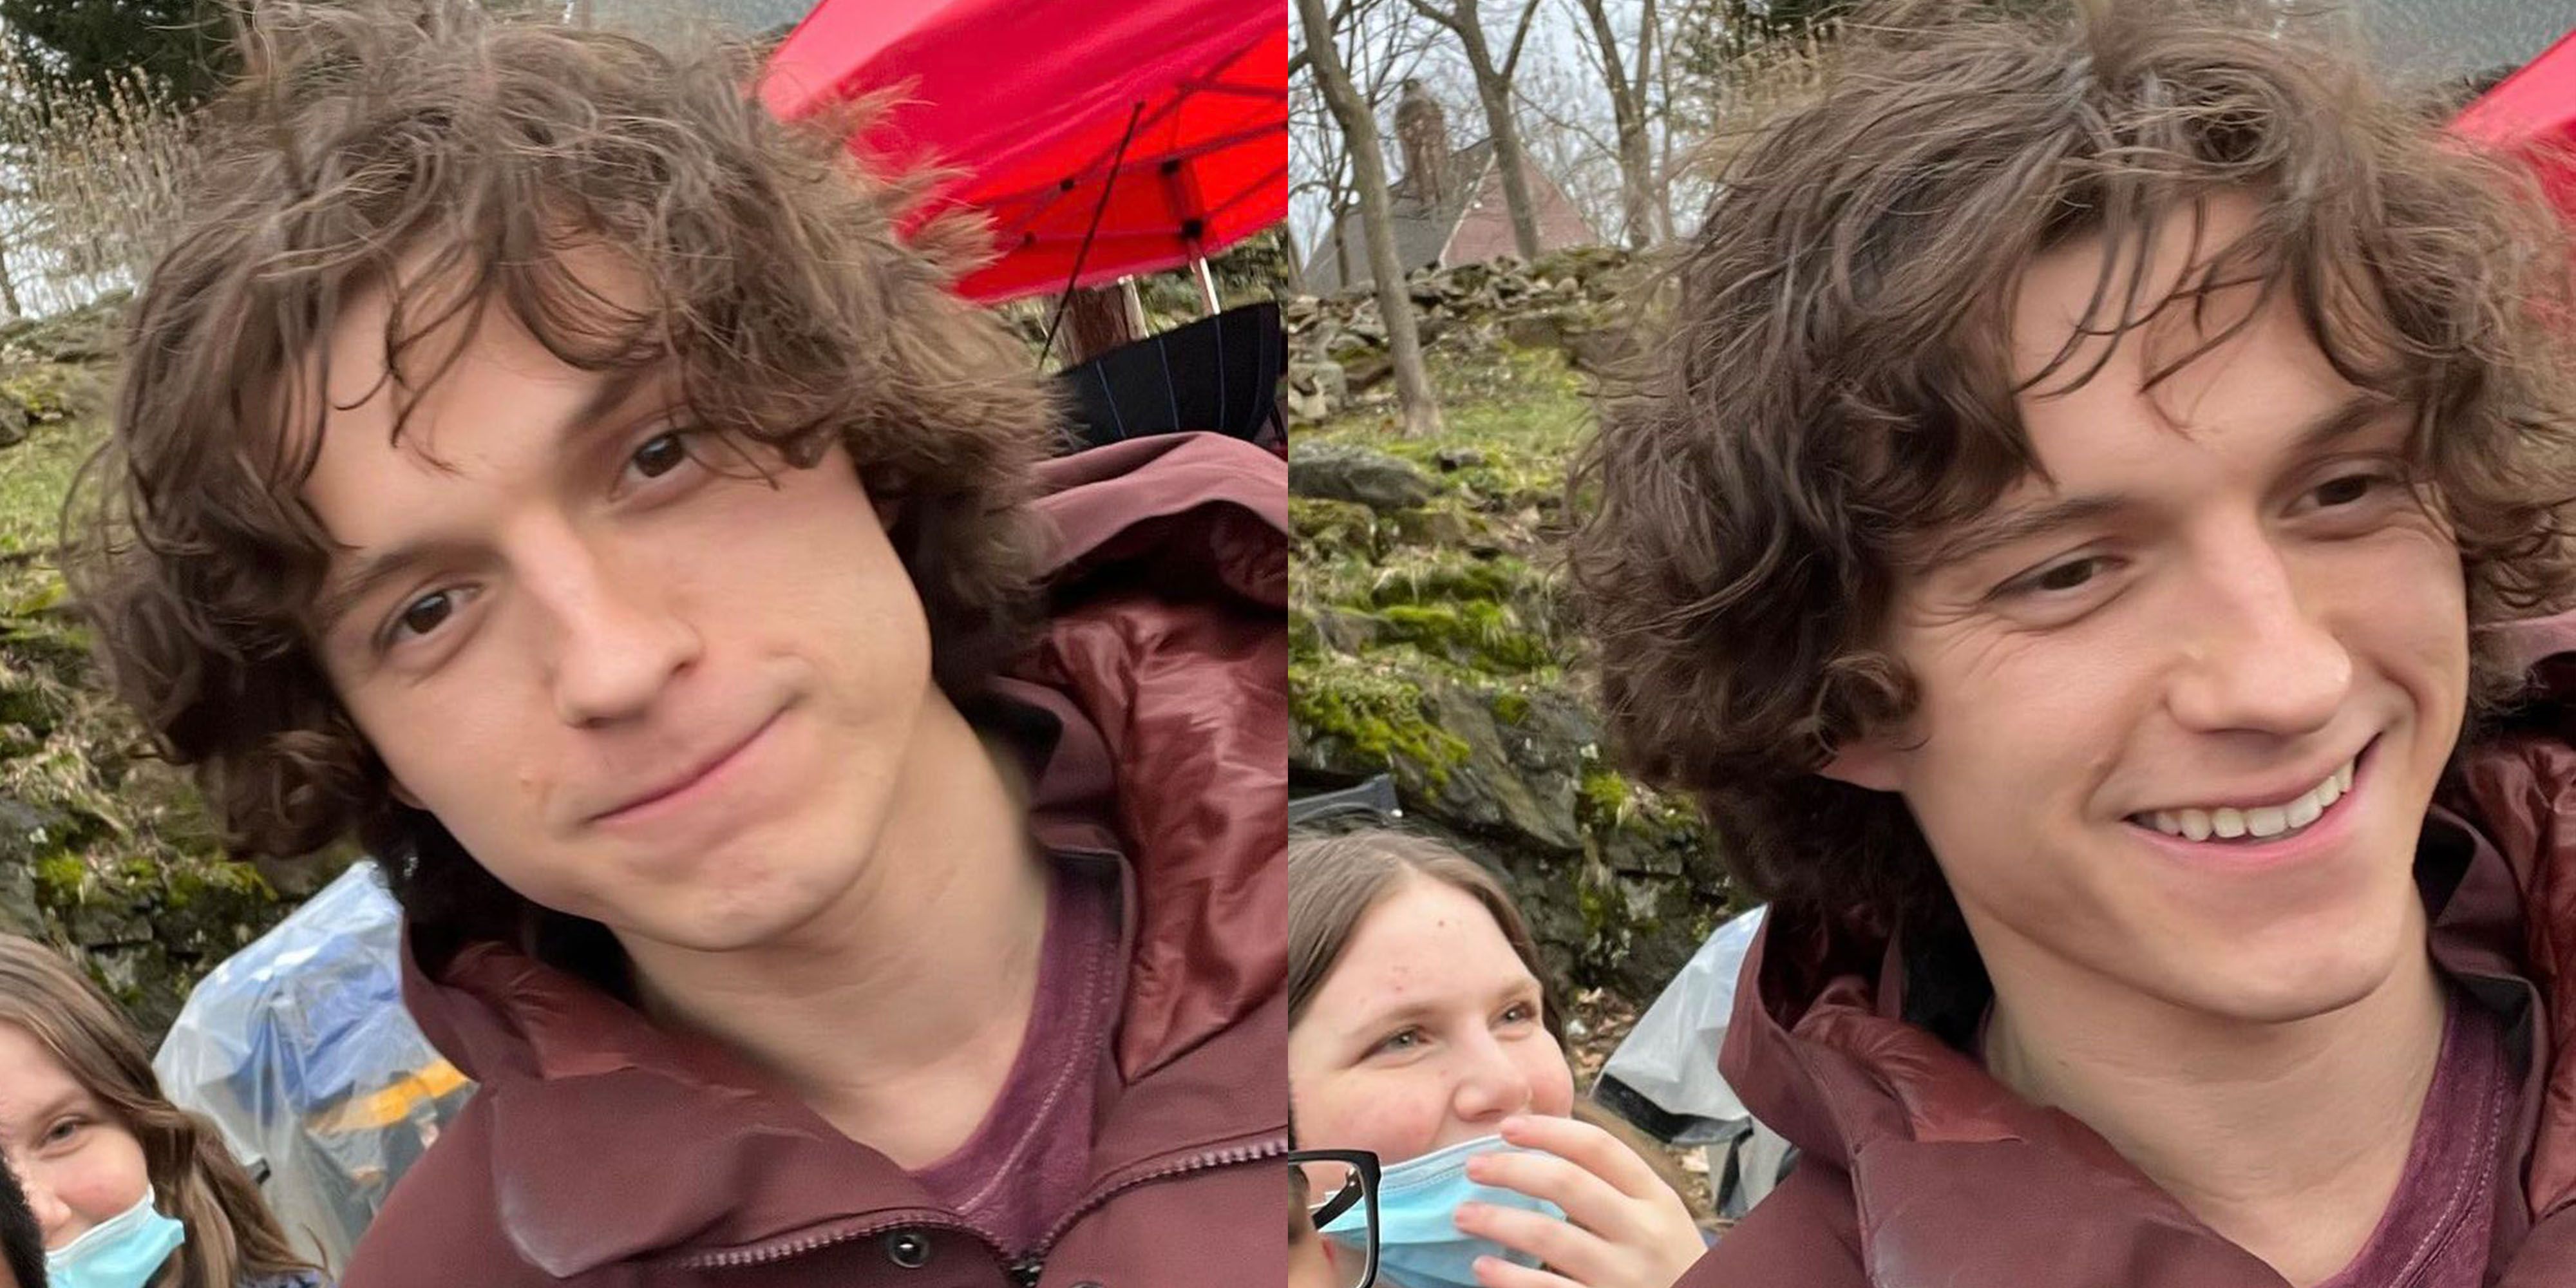 Tom Holland in New York City With Long Hair for The Crowded Room